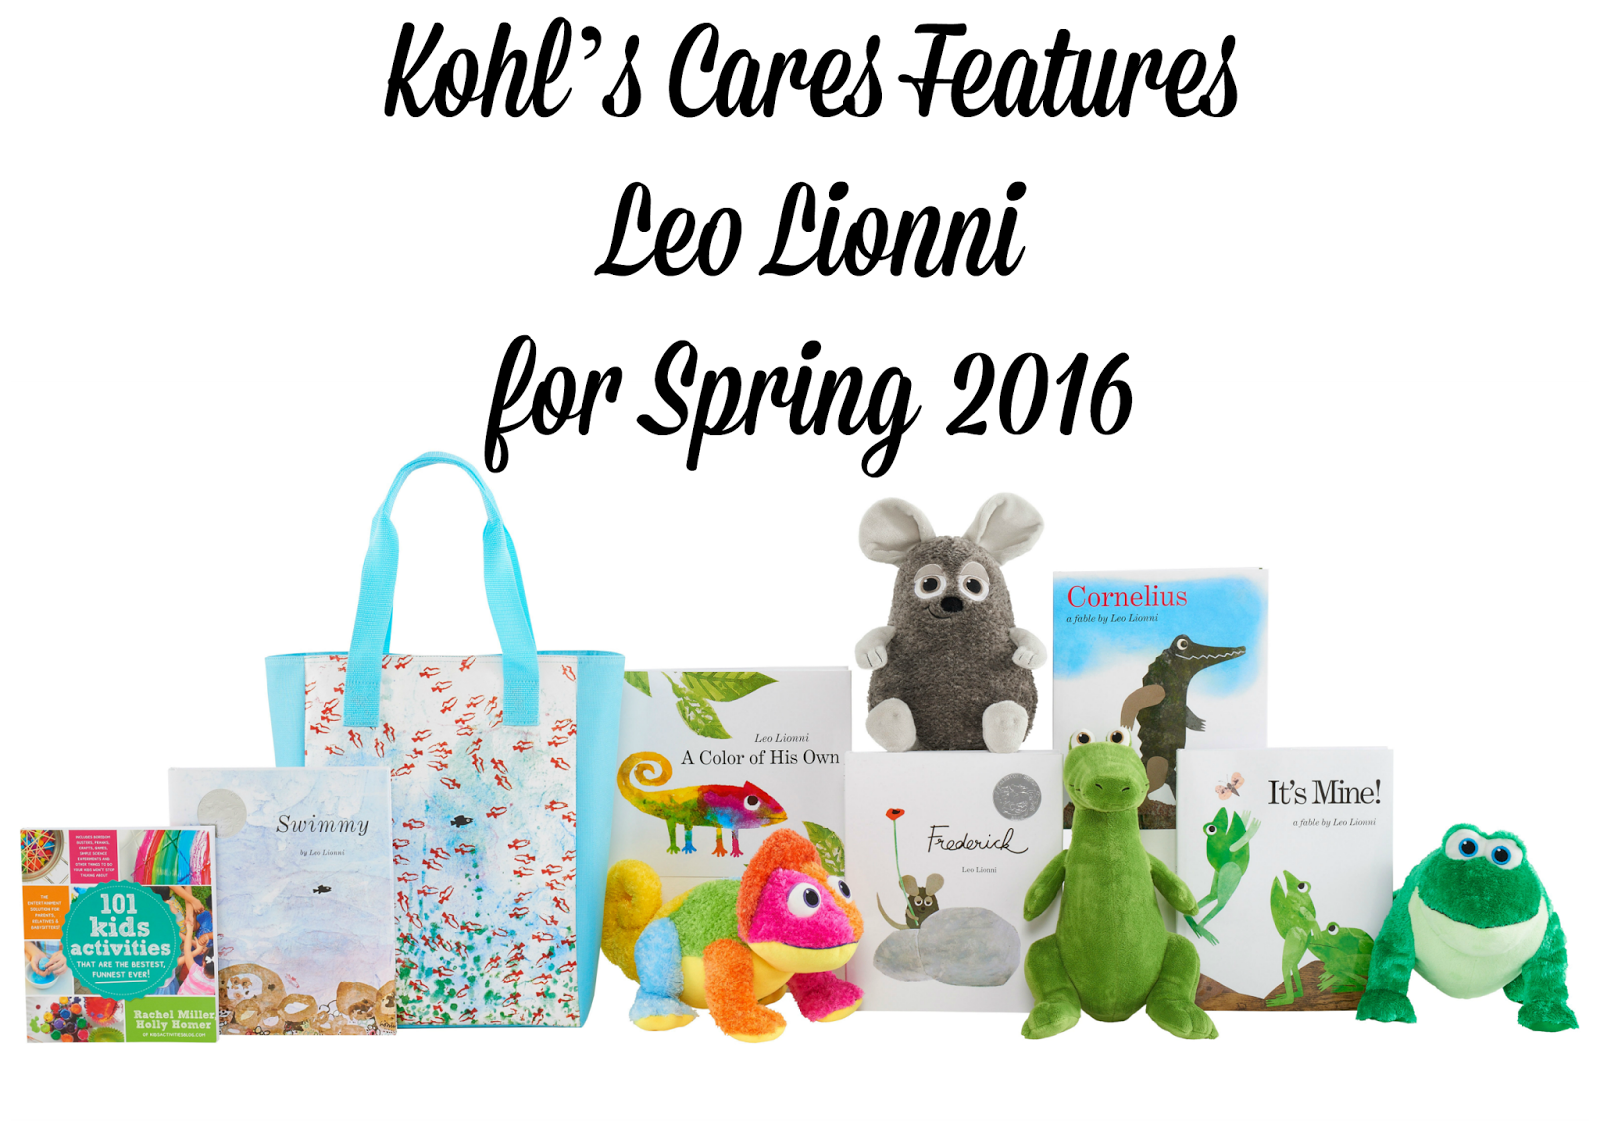 Kohl's Cares Features Leo Lionni for Spring 2016 - AnnMarie John